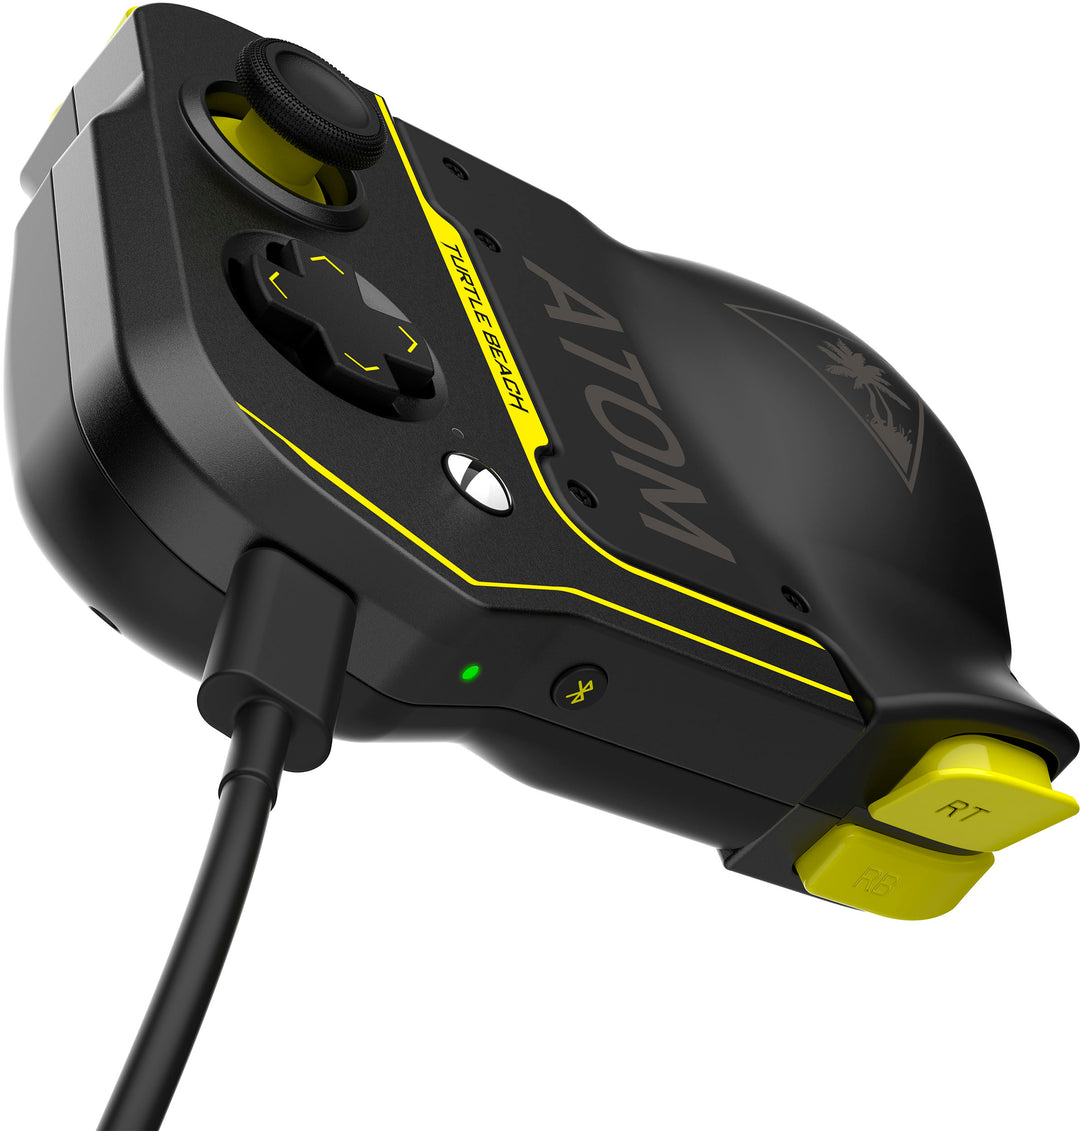 Turtle Beach - Atom Game Controller for Android Phones - Black/Yellow_6